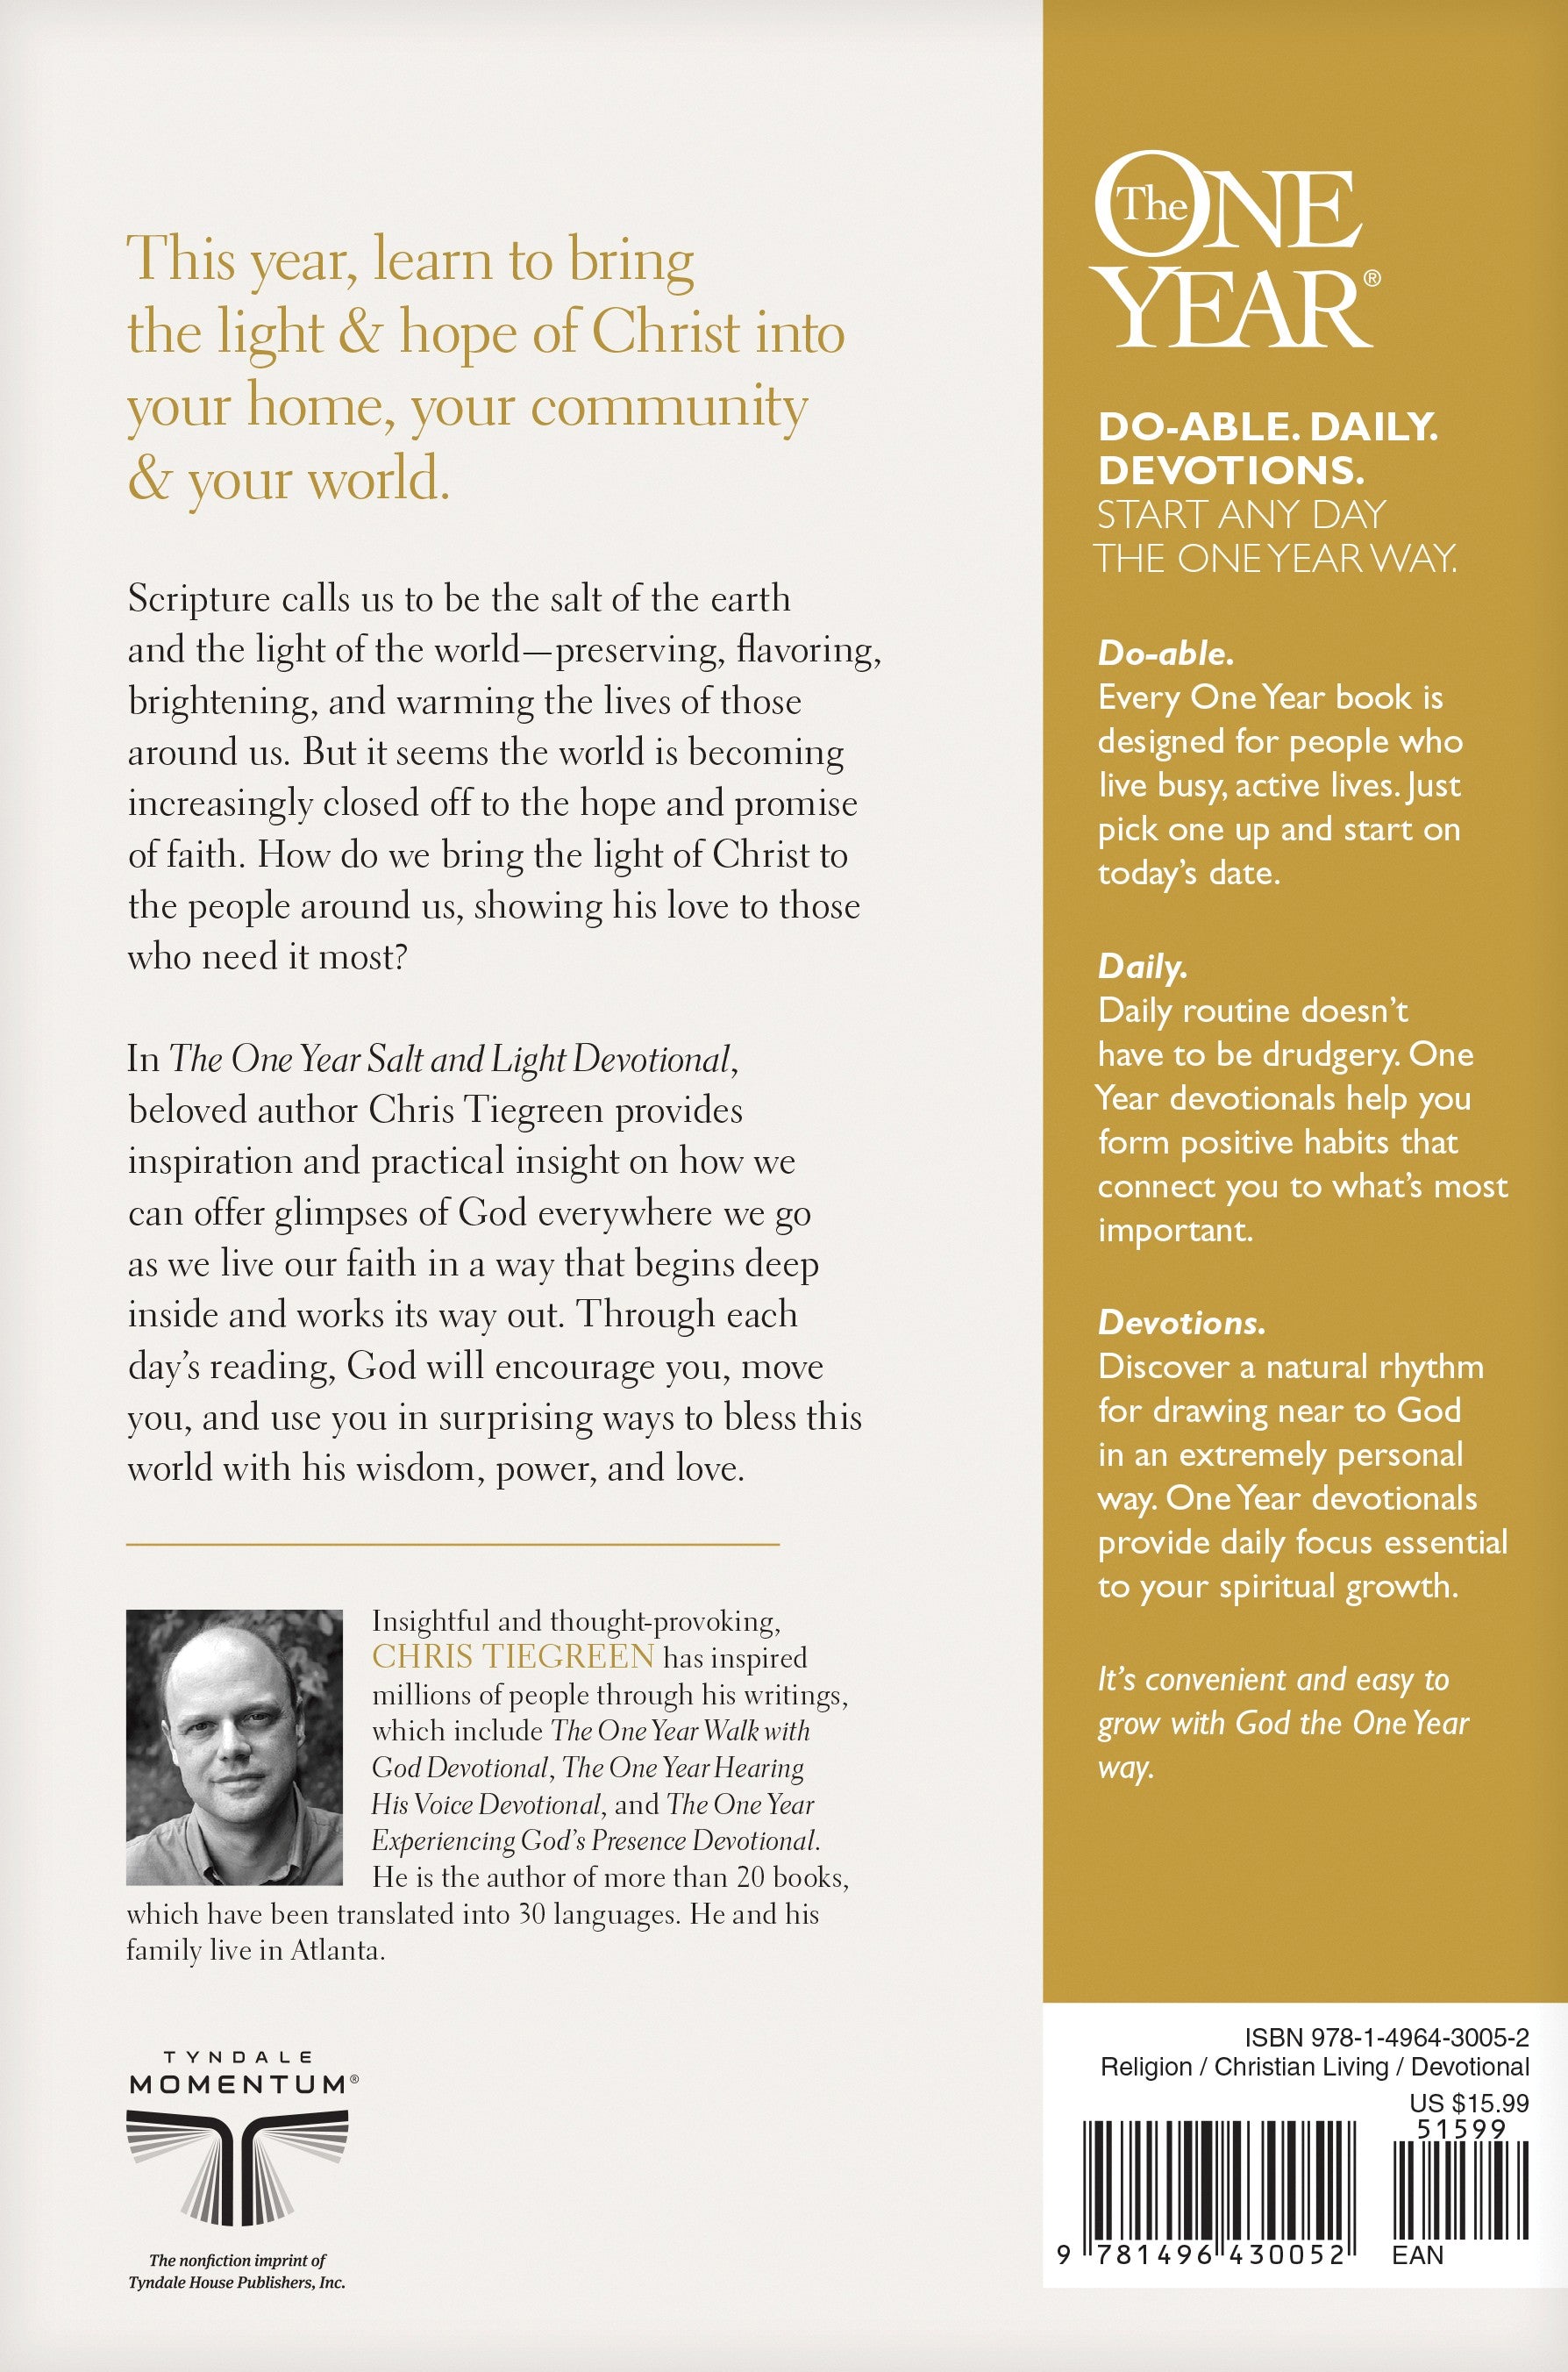 Image of One Year Salt and Light Devotional other